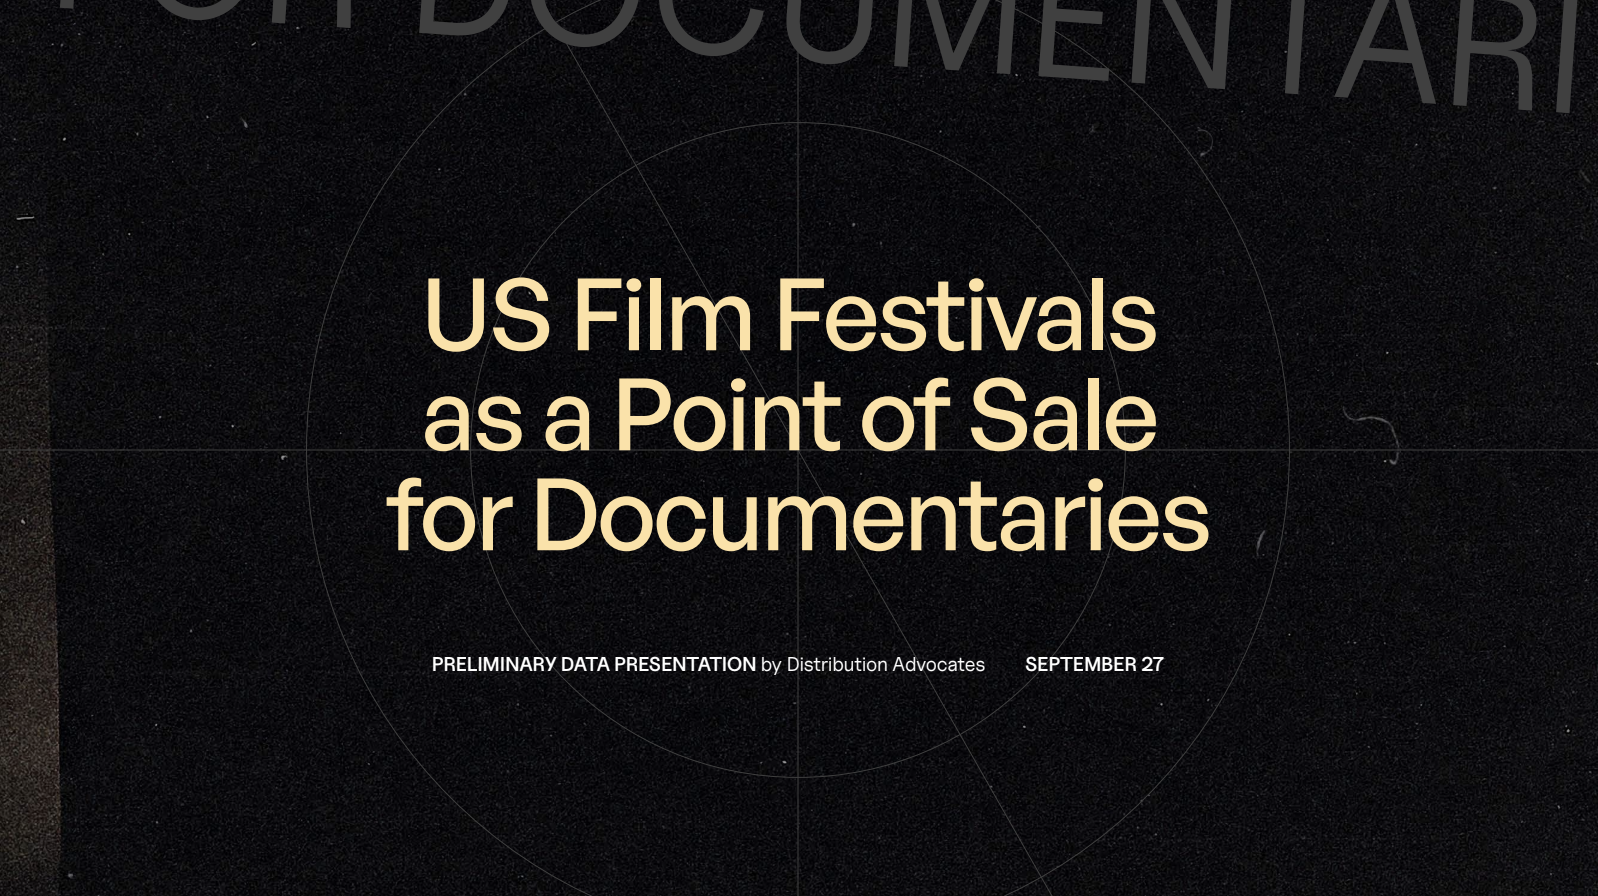 Slide showing the text: "US Film Festivals as a Point of Sale for Documentaries, Preliminary Data Presentation by Distribution Advocates, September 27"